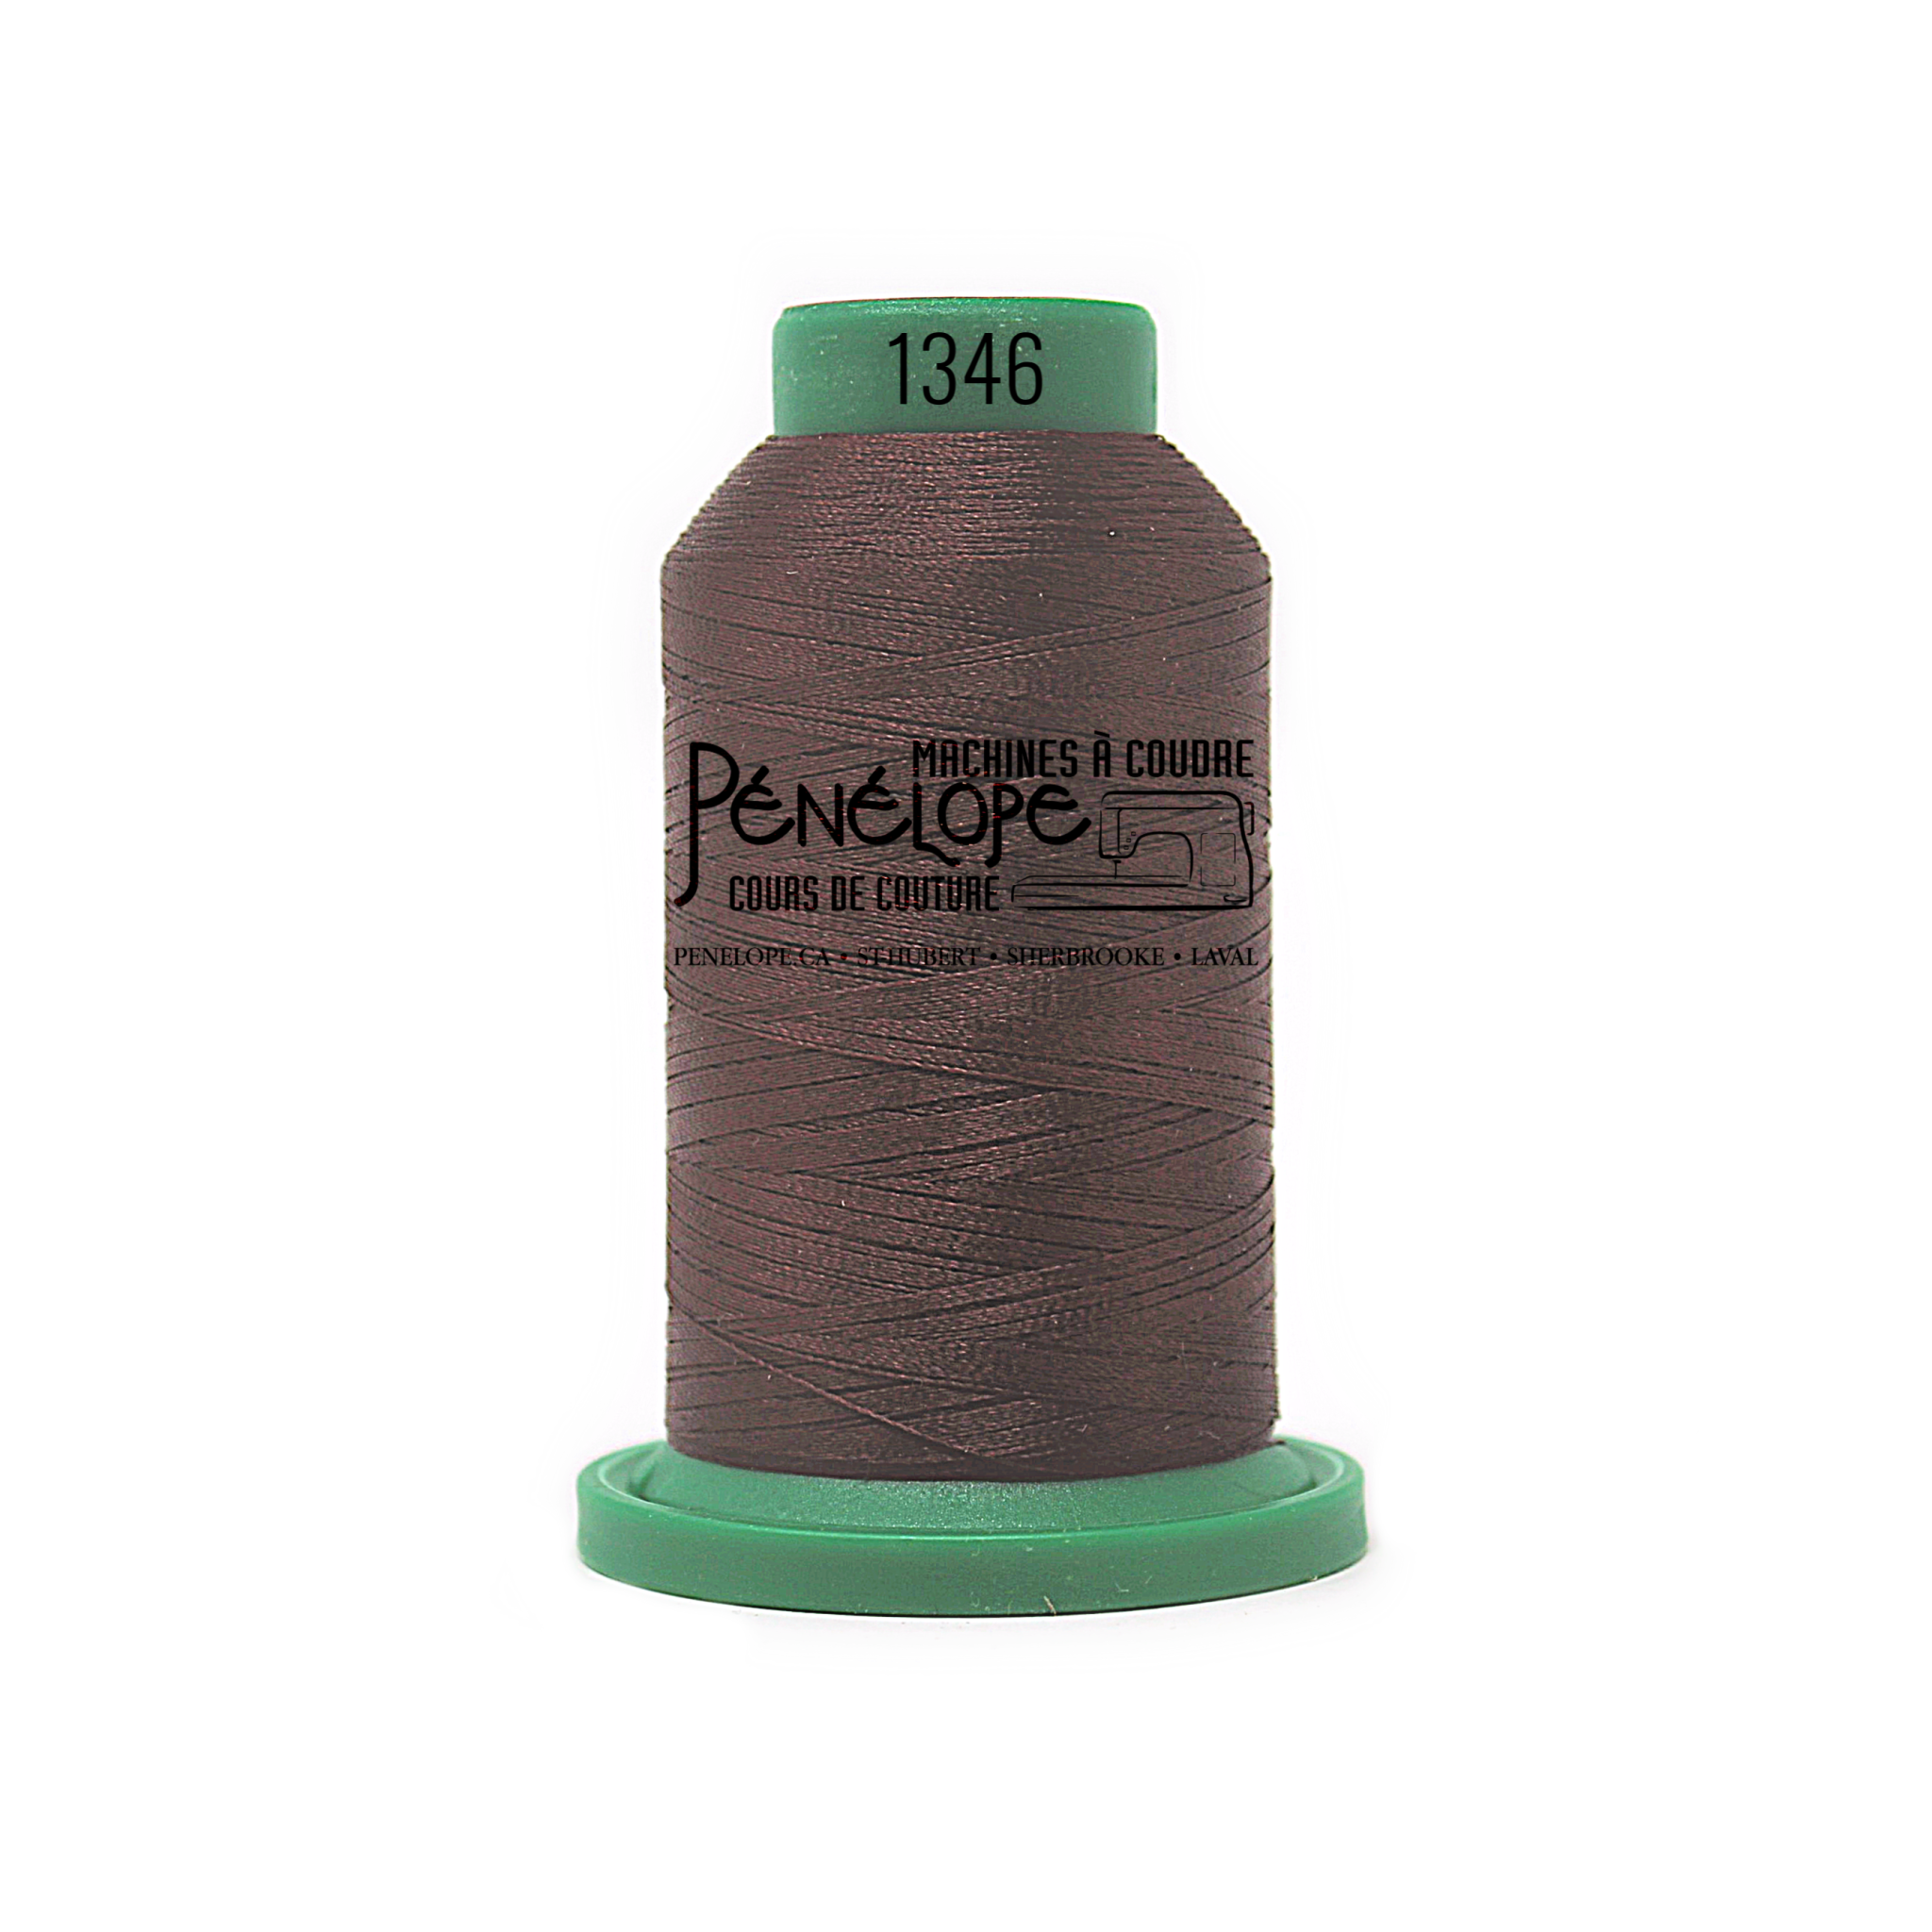 Isacord Isacord sewing and embroidery thread 1346